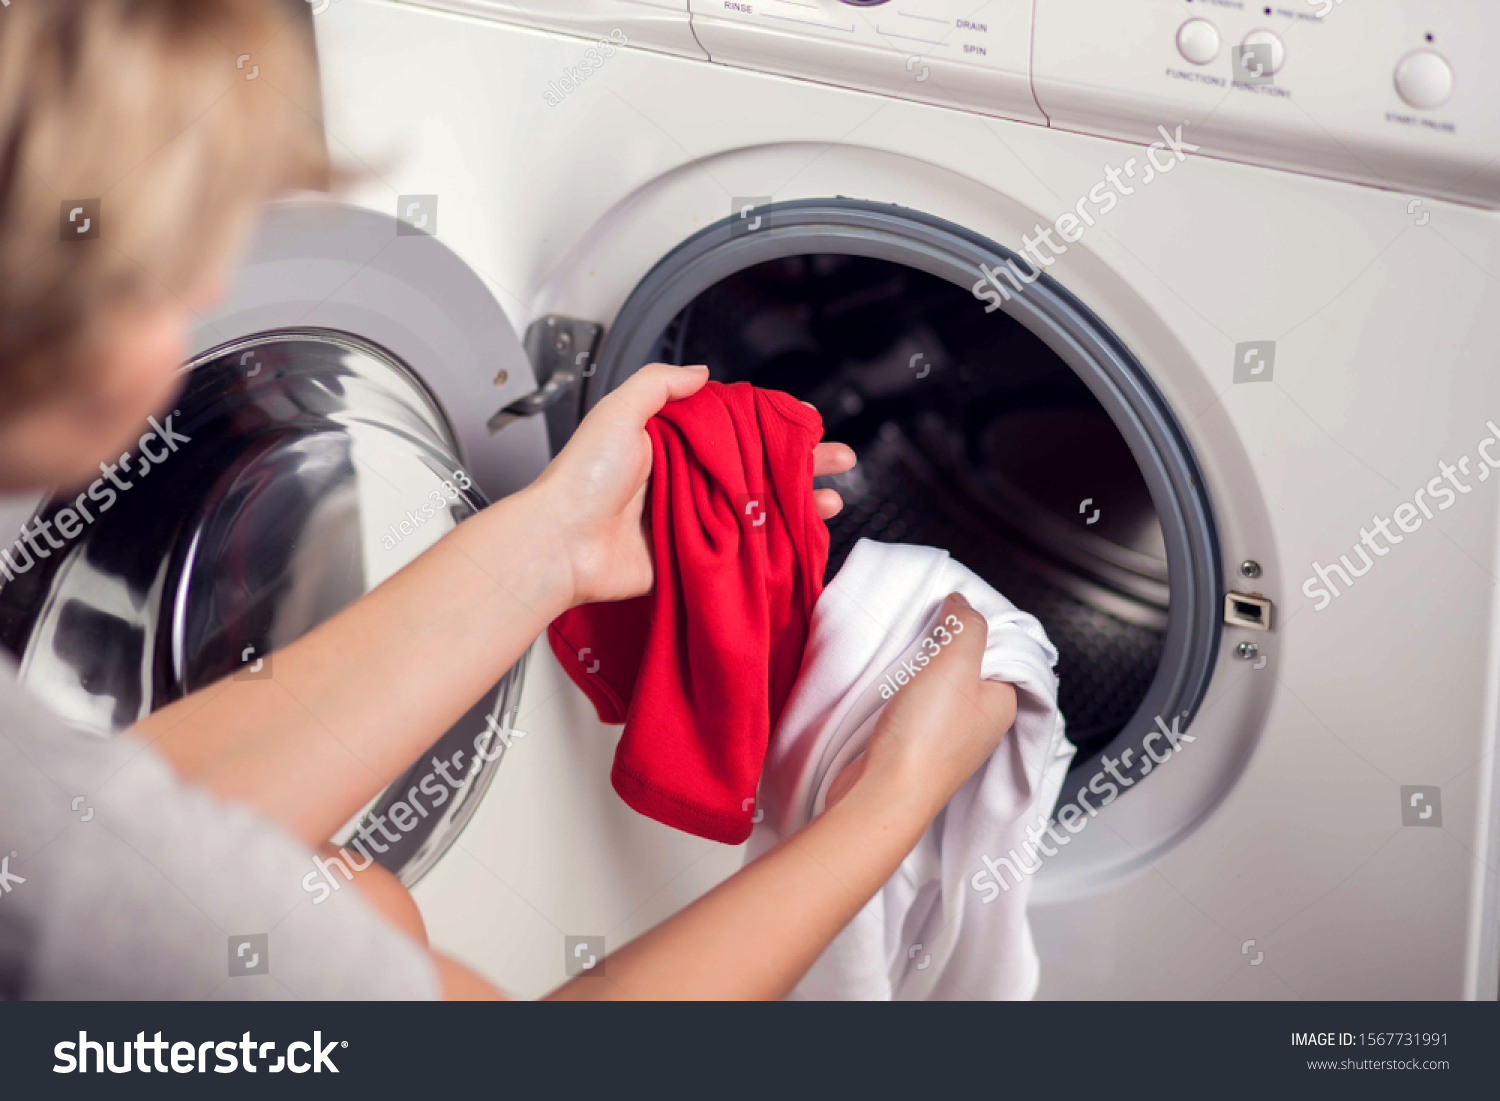 Loading White Color Clothes Washing Machine Stock Photo Edit Now 1567731991